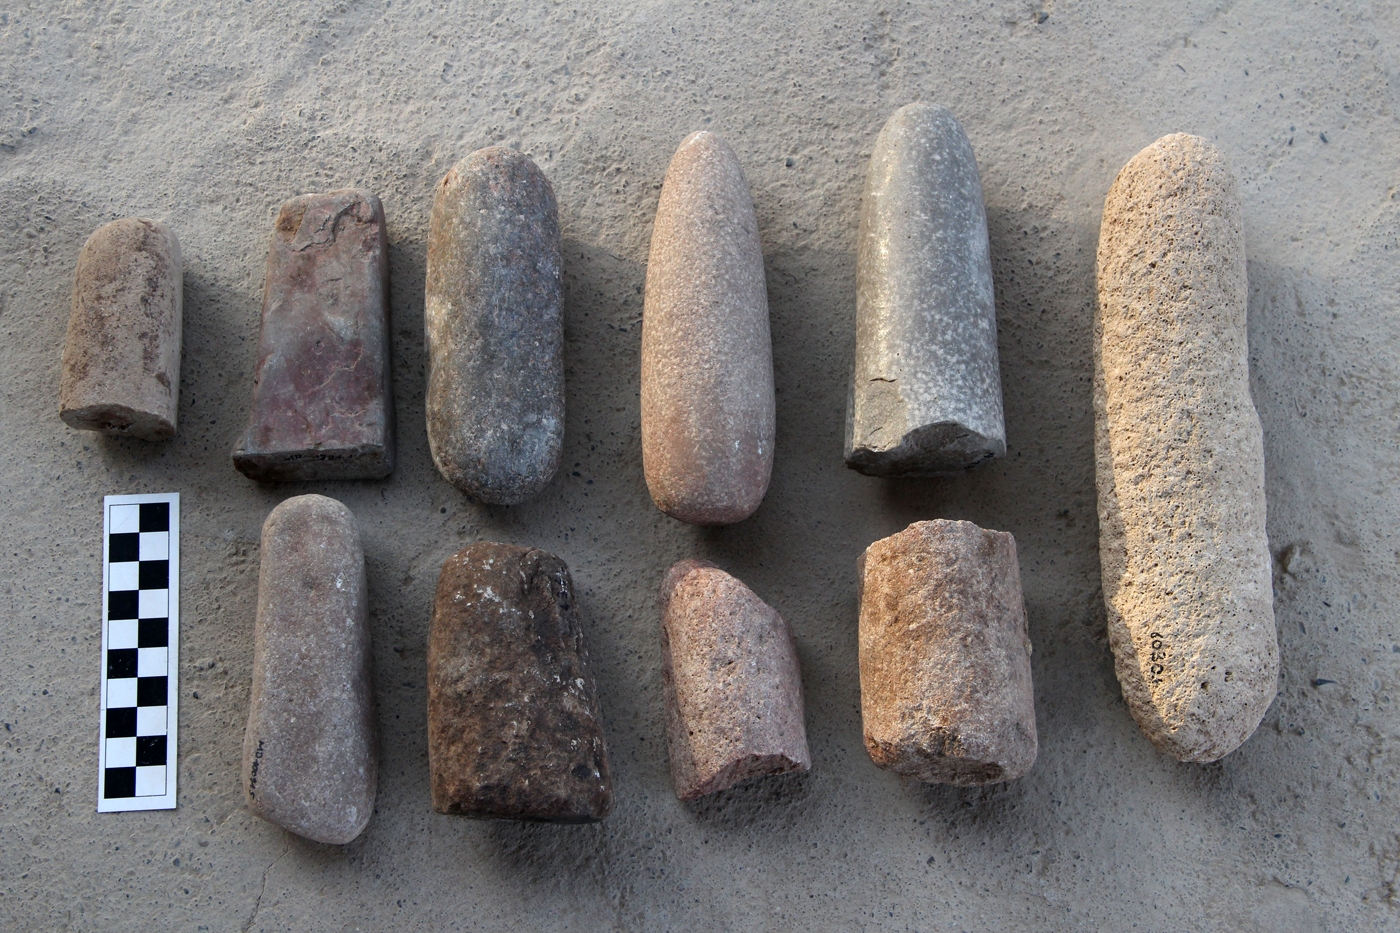 Stone mortars made of different raw materials. Some were worked substantially into shape, others were left more or less in their natural form.